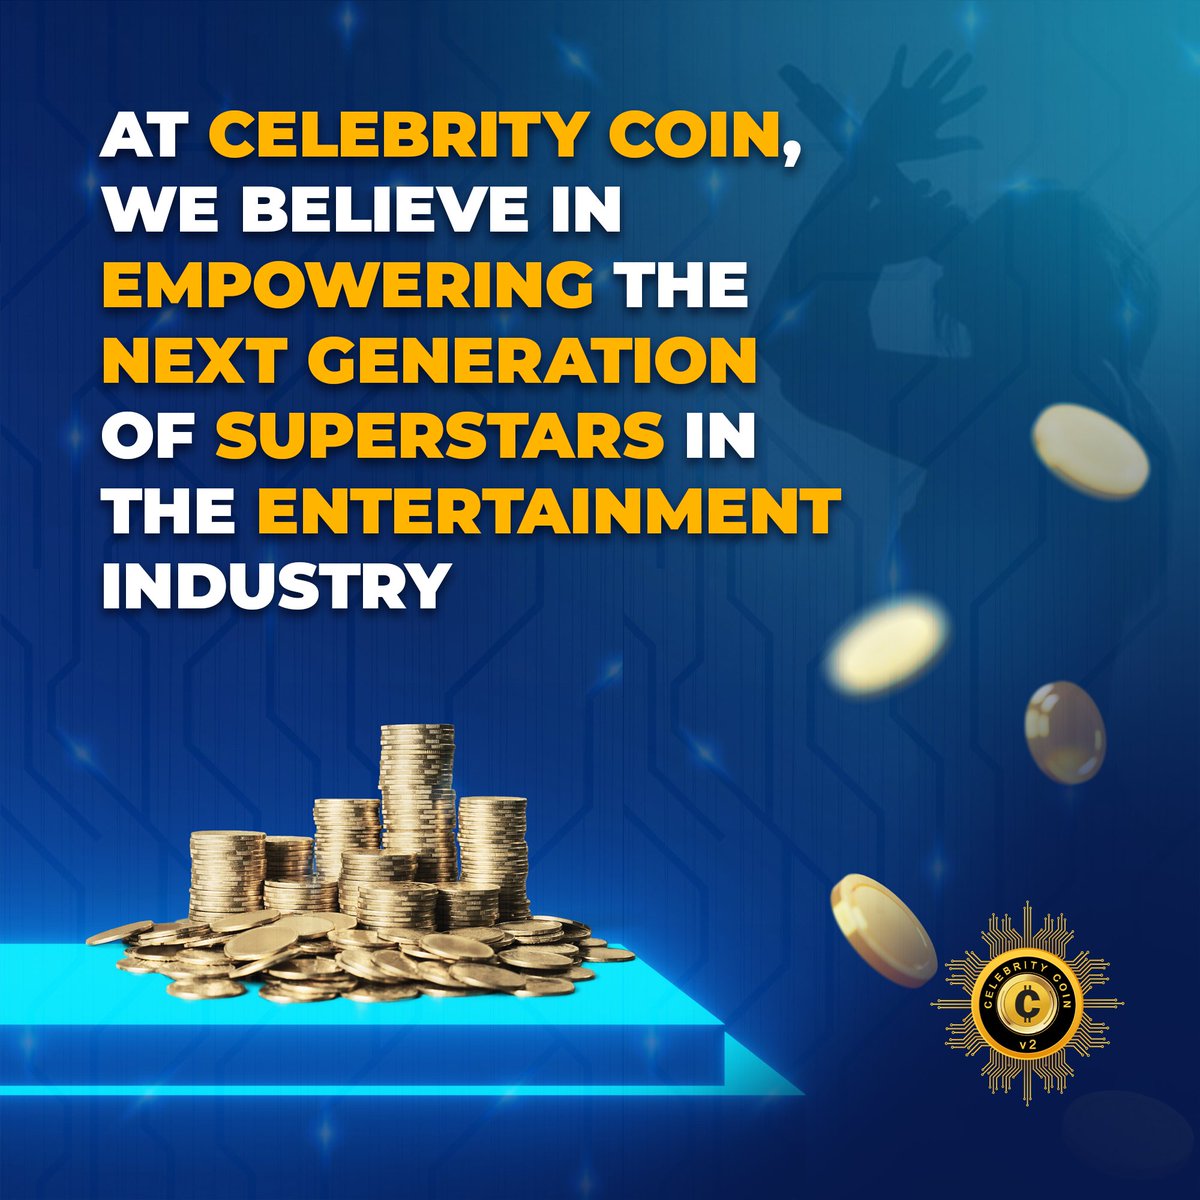 At Celebrity Coin, we believe in #empowering the next generation of #superstars in the #entertainment industry. #SupportingTalent #CelebritiesOfTheFuture #EntertainmentIndustry @STUDIONATION2